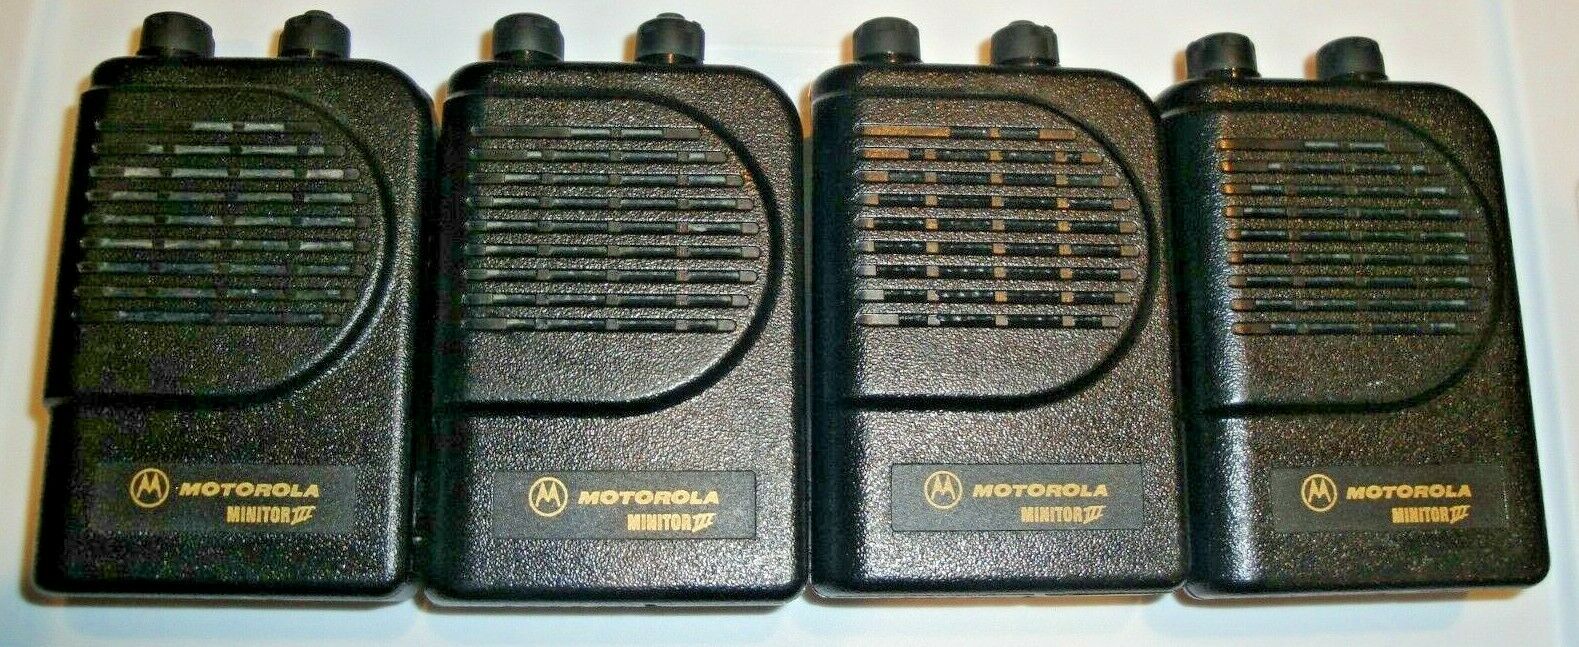 2 X Leather case Motorola pager Minitor 3 and Apollo 100/101,etc.heavy duty